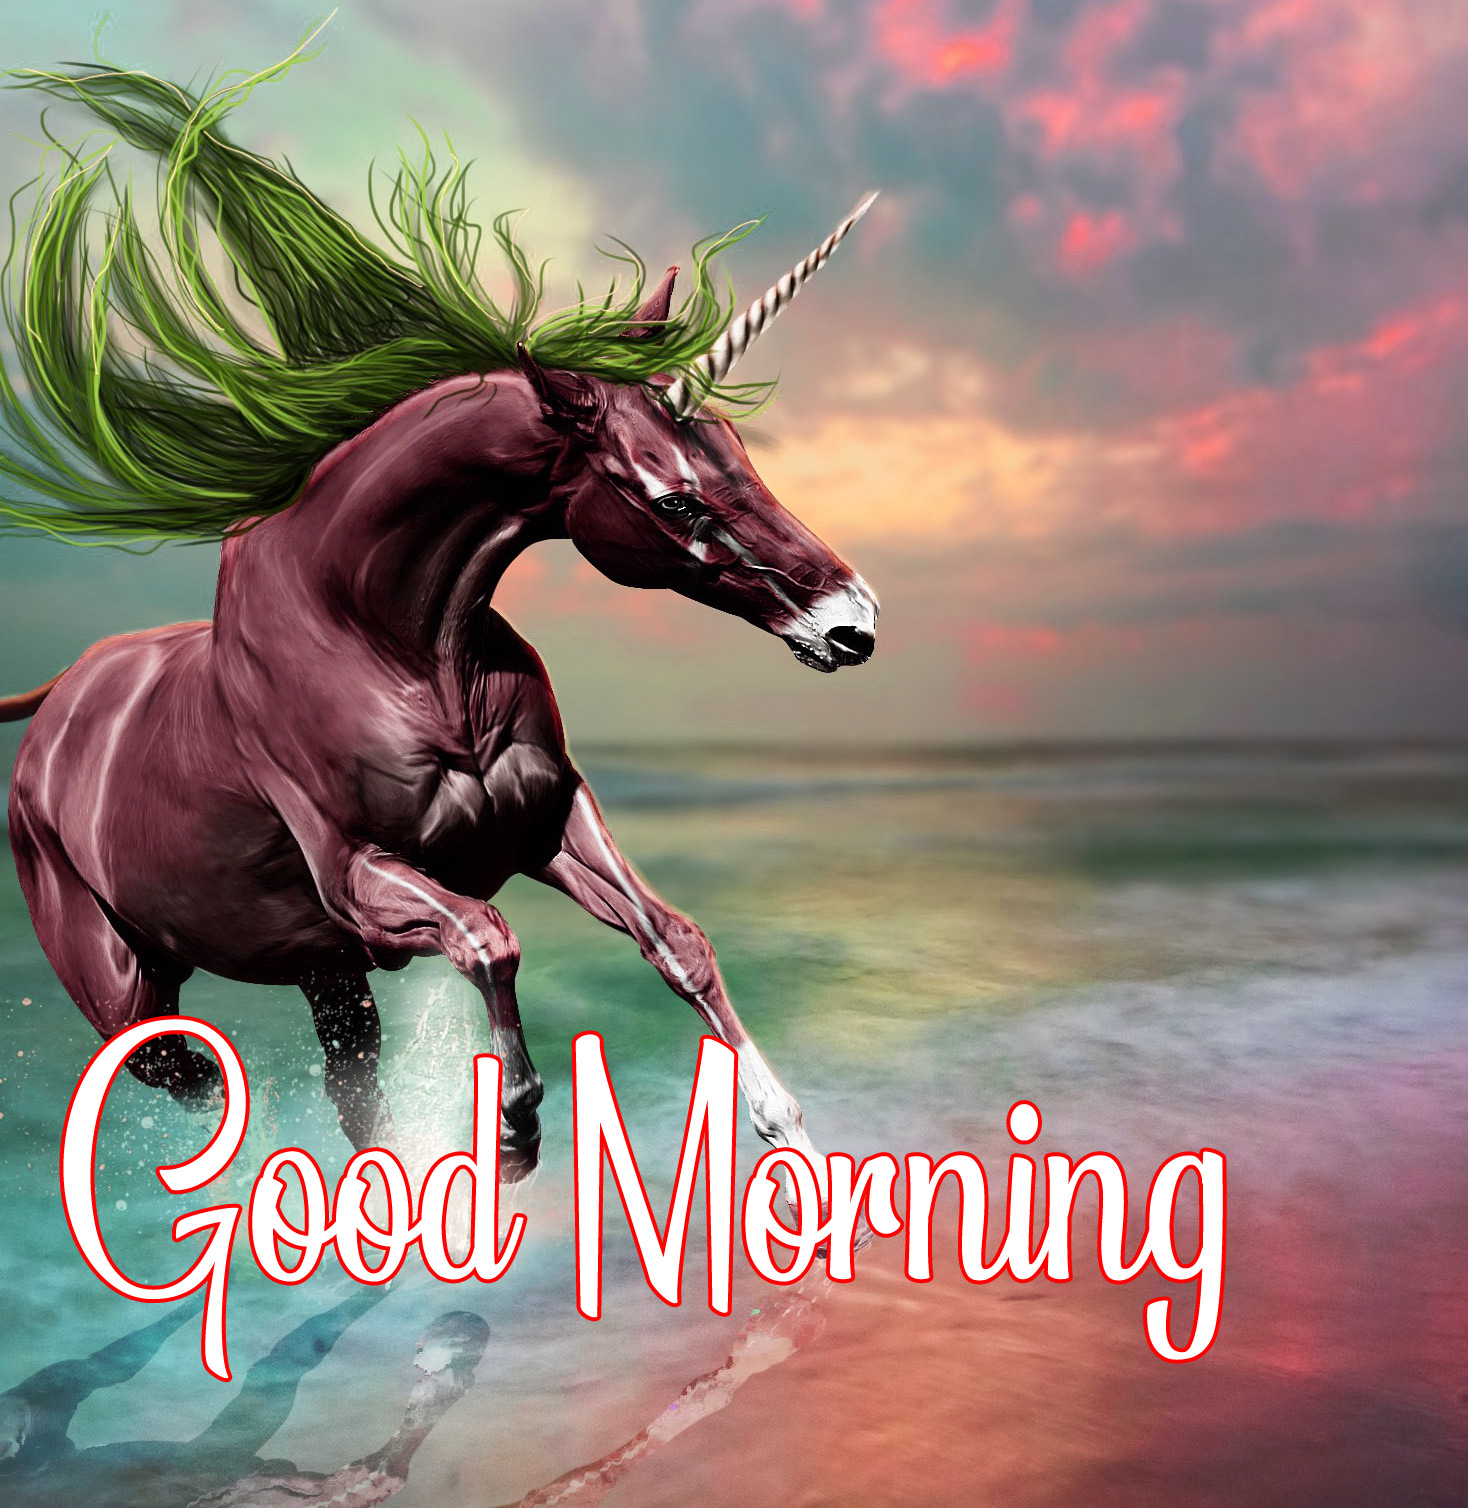 Inspirational Good Morning Horse Images Wallpapers